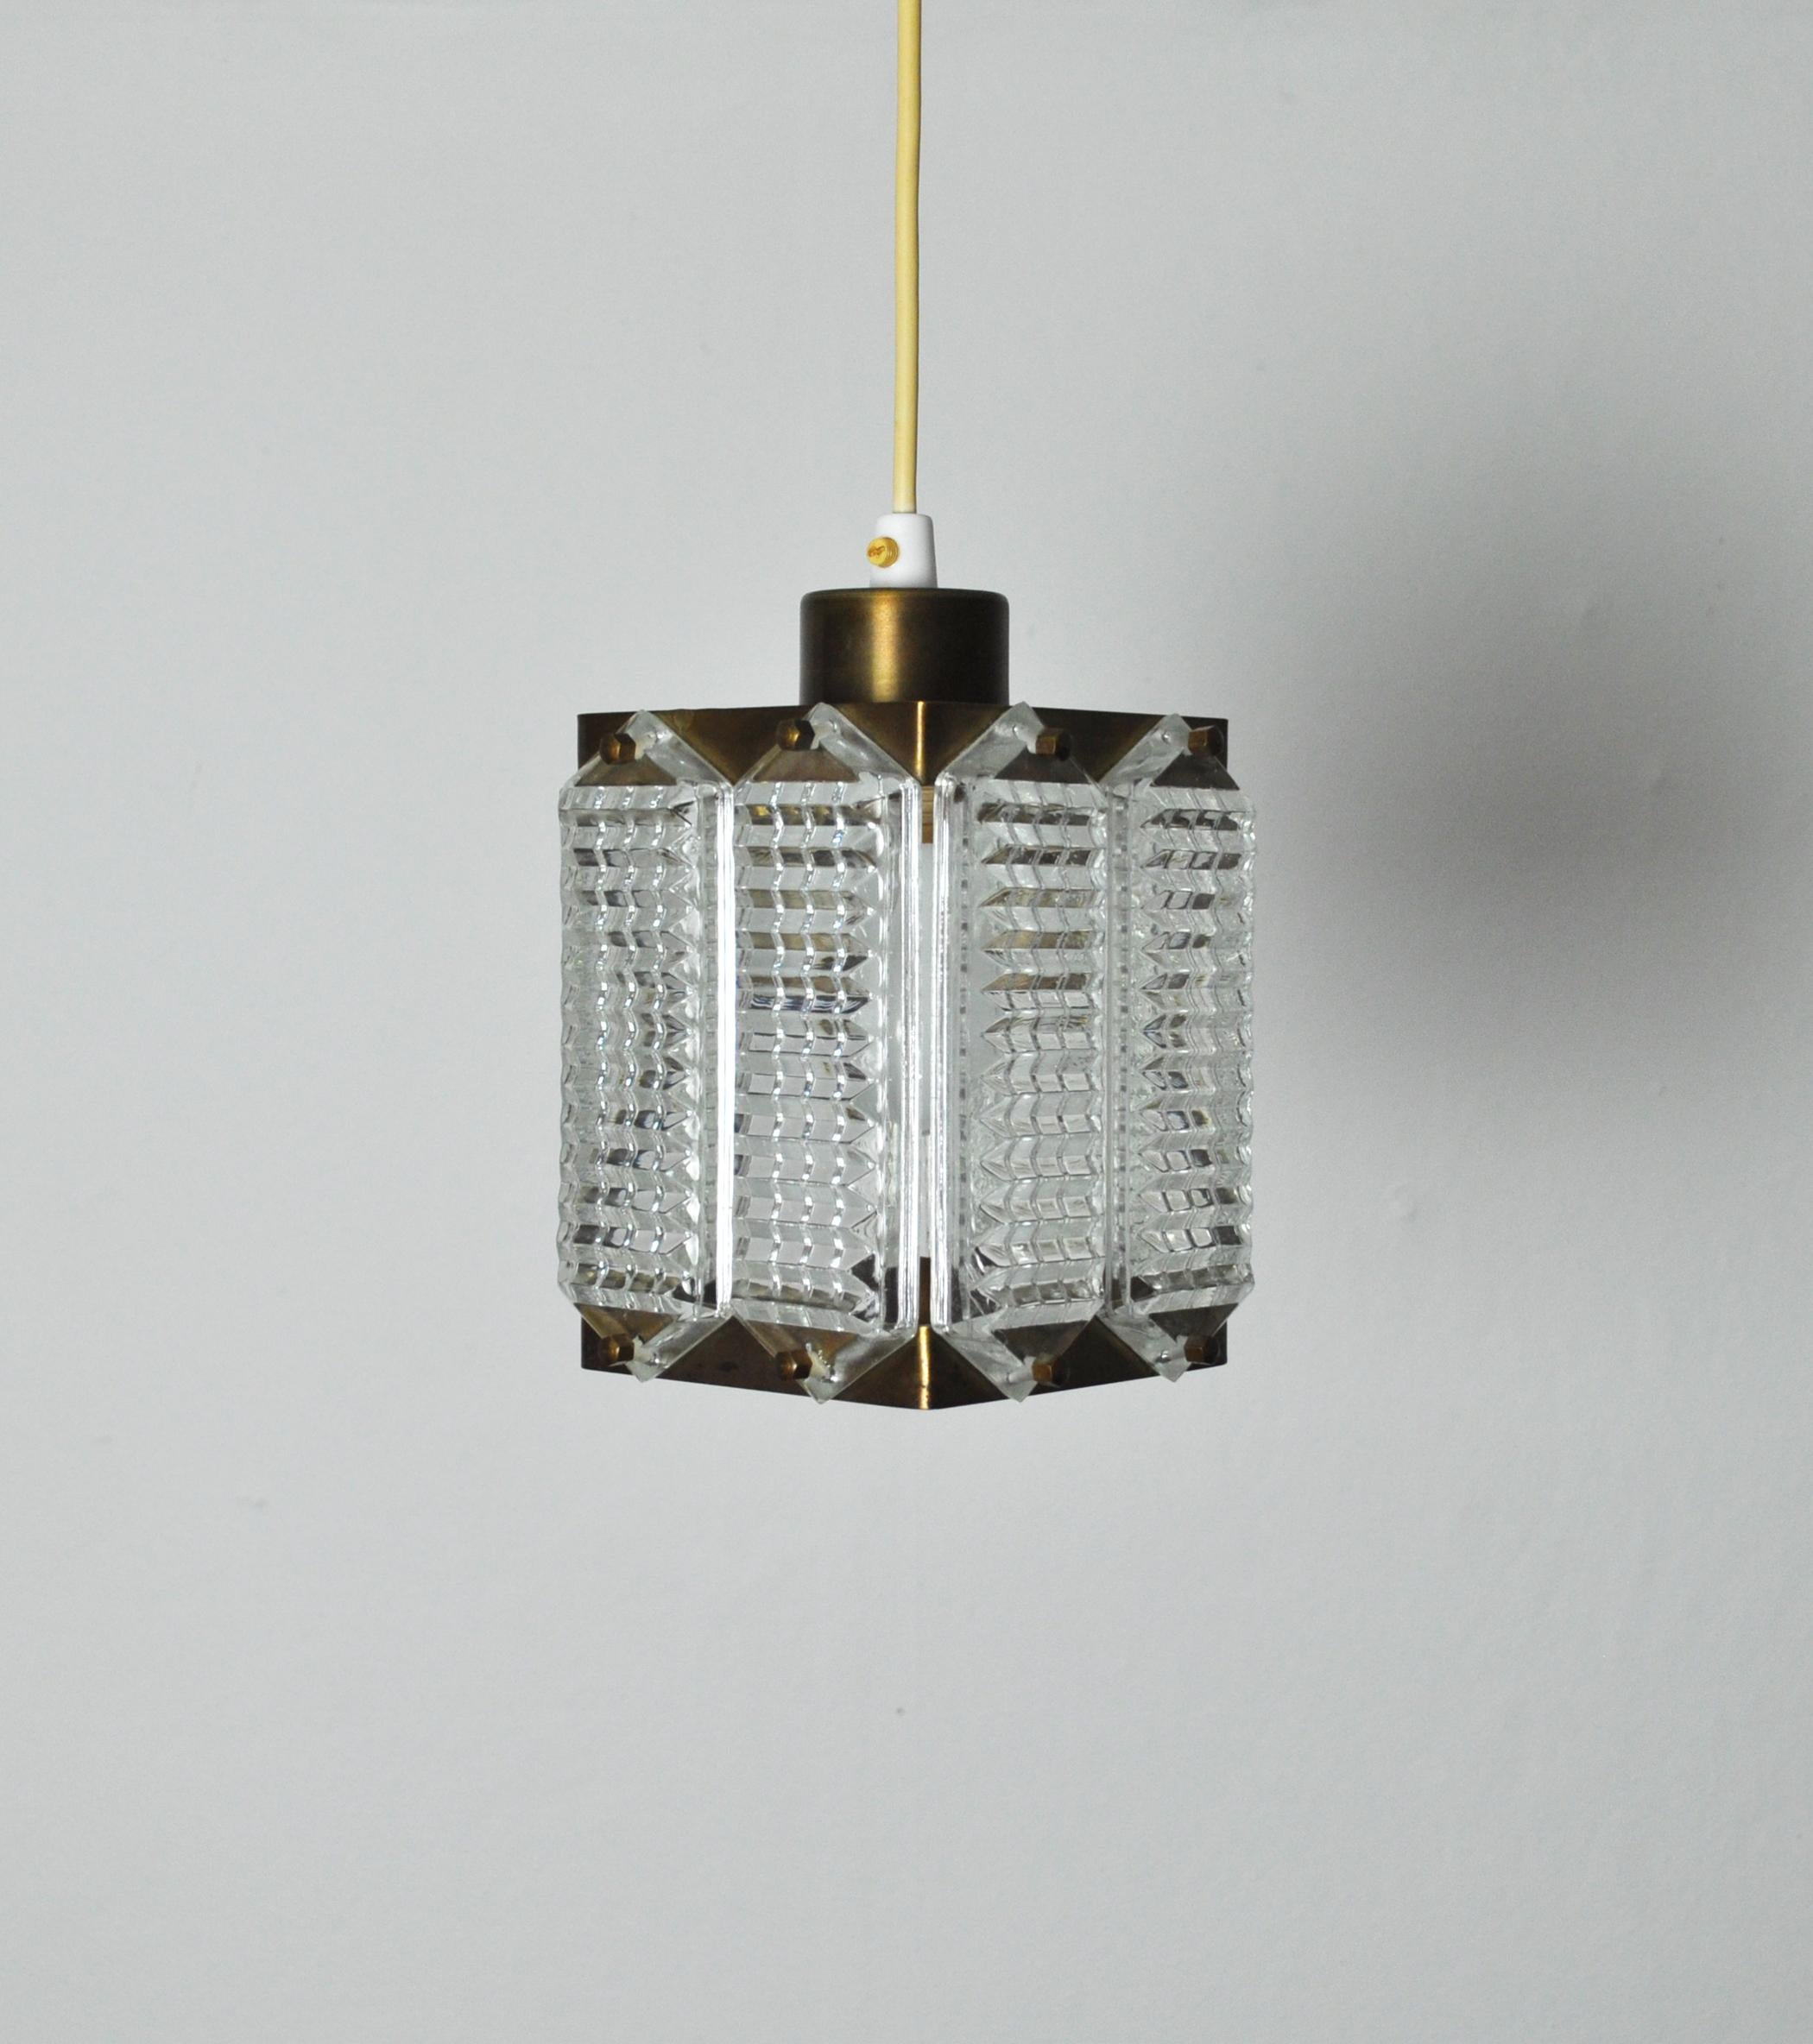 Wiktor Berndt brass and Swedish crystal ceiling light for Flygsfors, 1950s-1960s.
Fine vintage condition with patination.
Wiktor Berndt was chief designer of Flygsfors from 1956-1974.